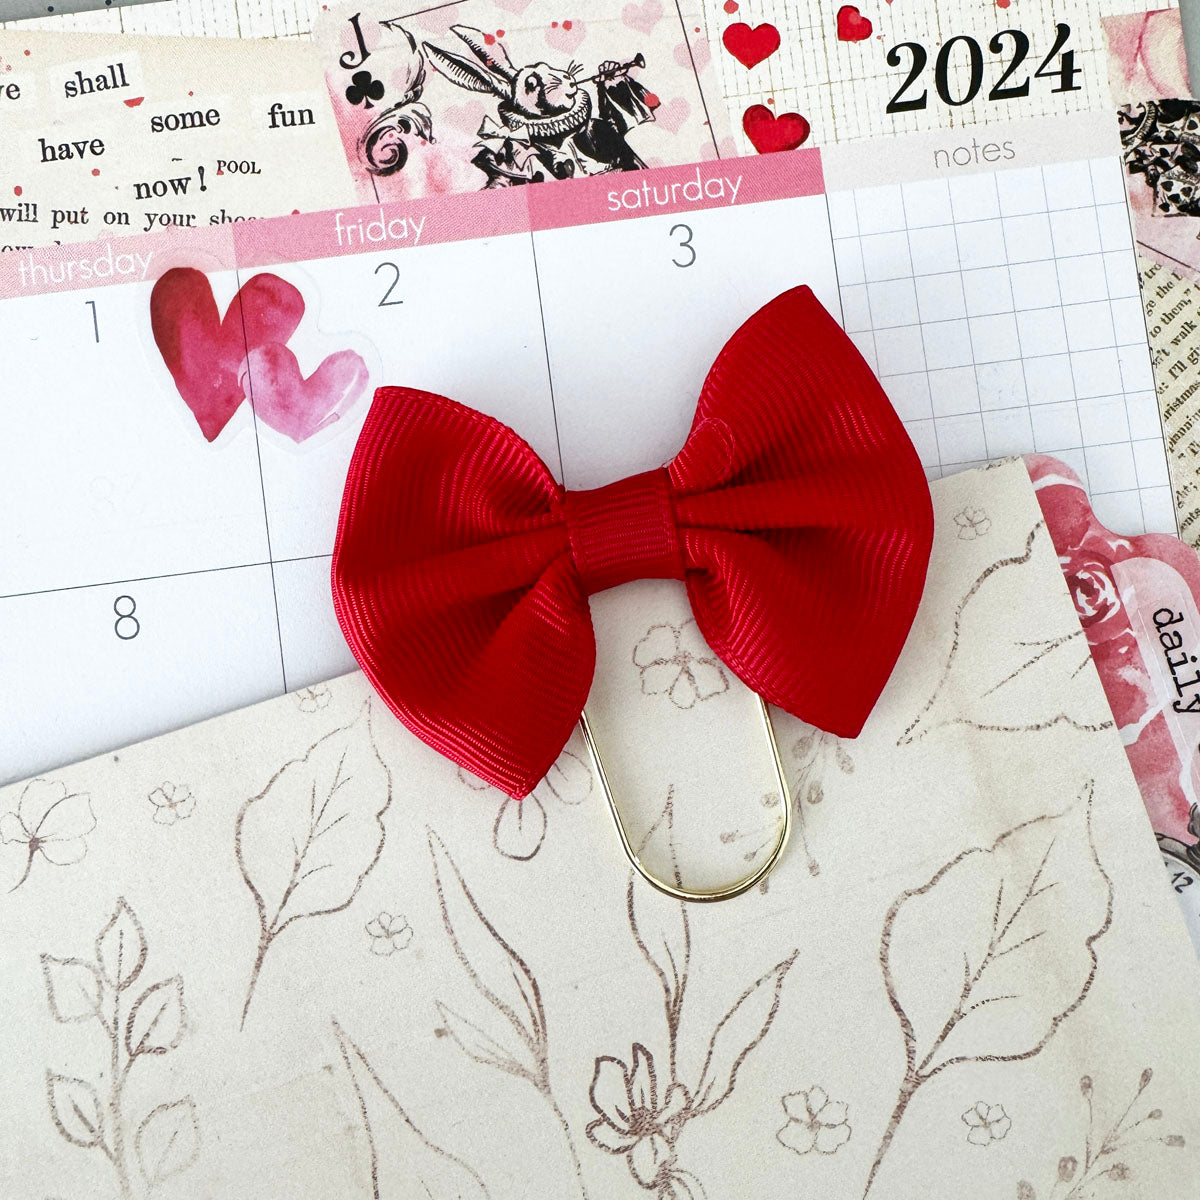 Wonderland Red Fabric Bow Clip - February 2024